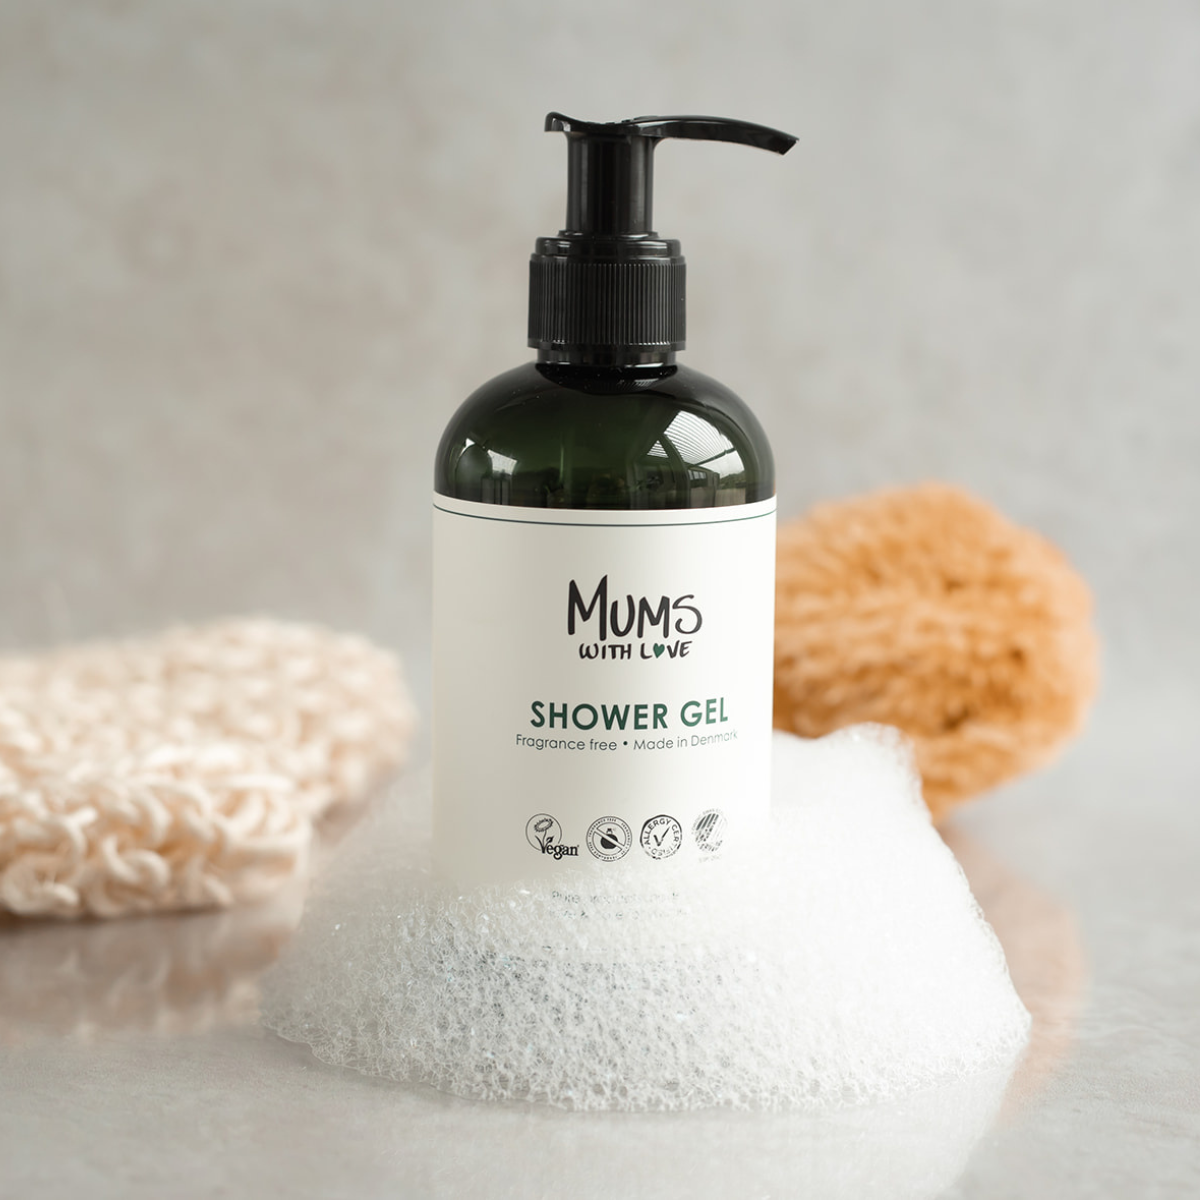 MUMS WITH LOVE APS SHOWER GEL 250 ml Body